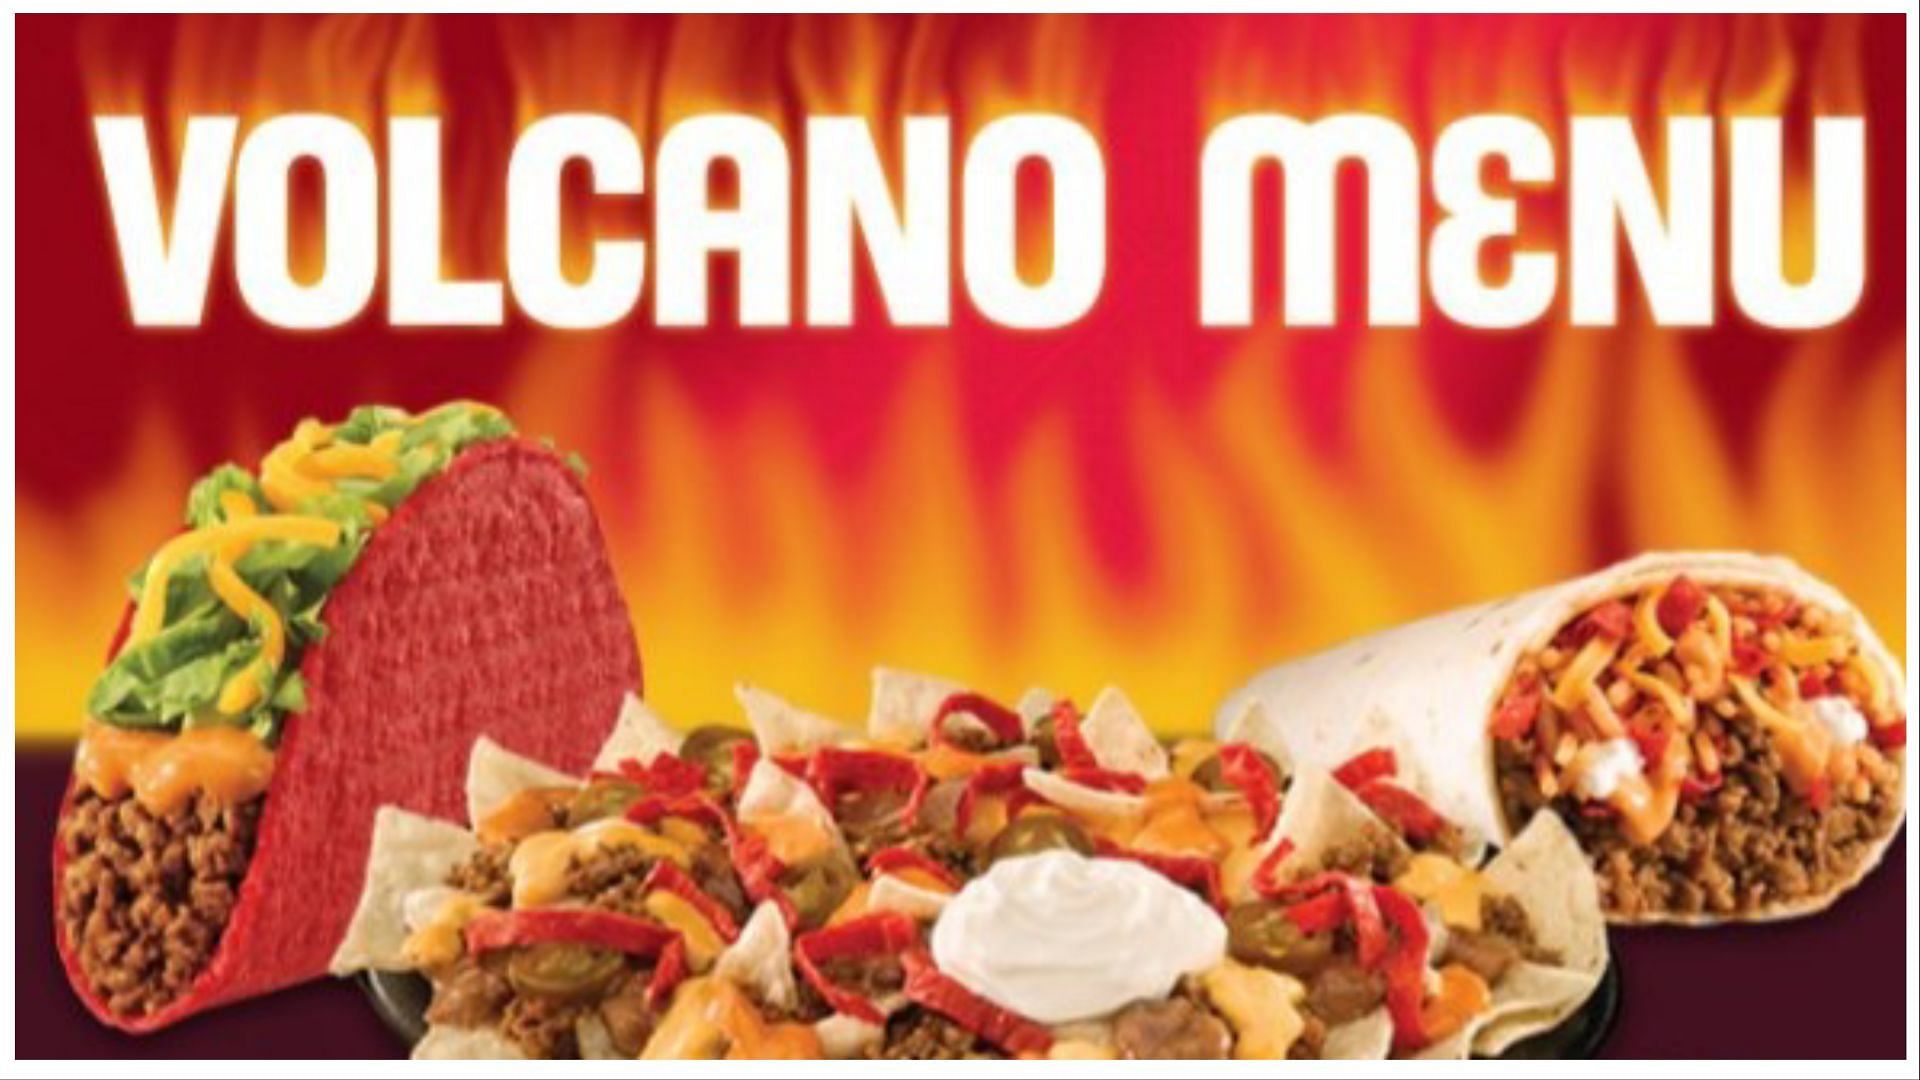 When will Taco Bell bring back its Volcano menu? Details revealed